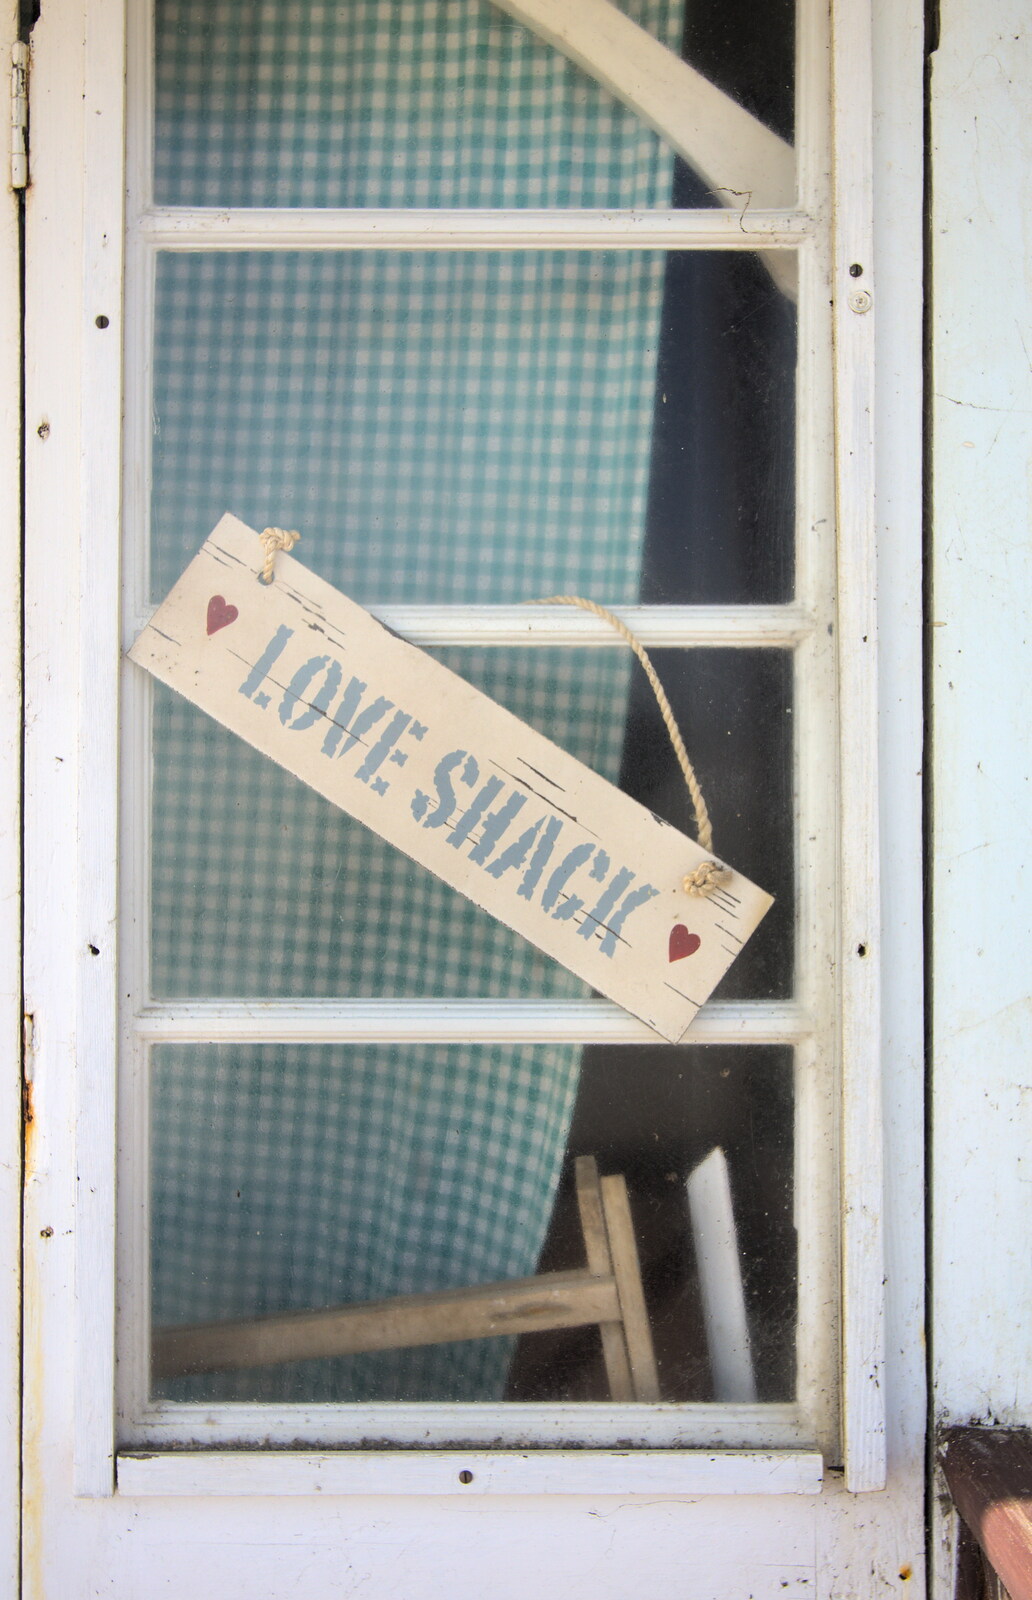 The 'love shack' from Southwold By The Sea, Suffolk - 29th September 2013